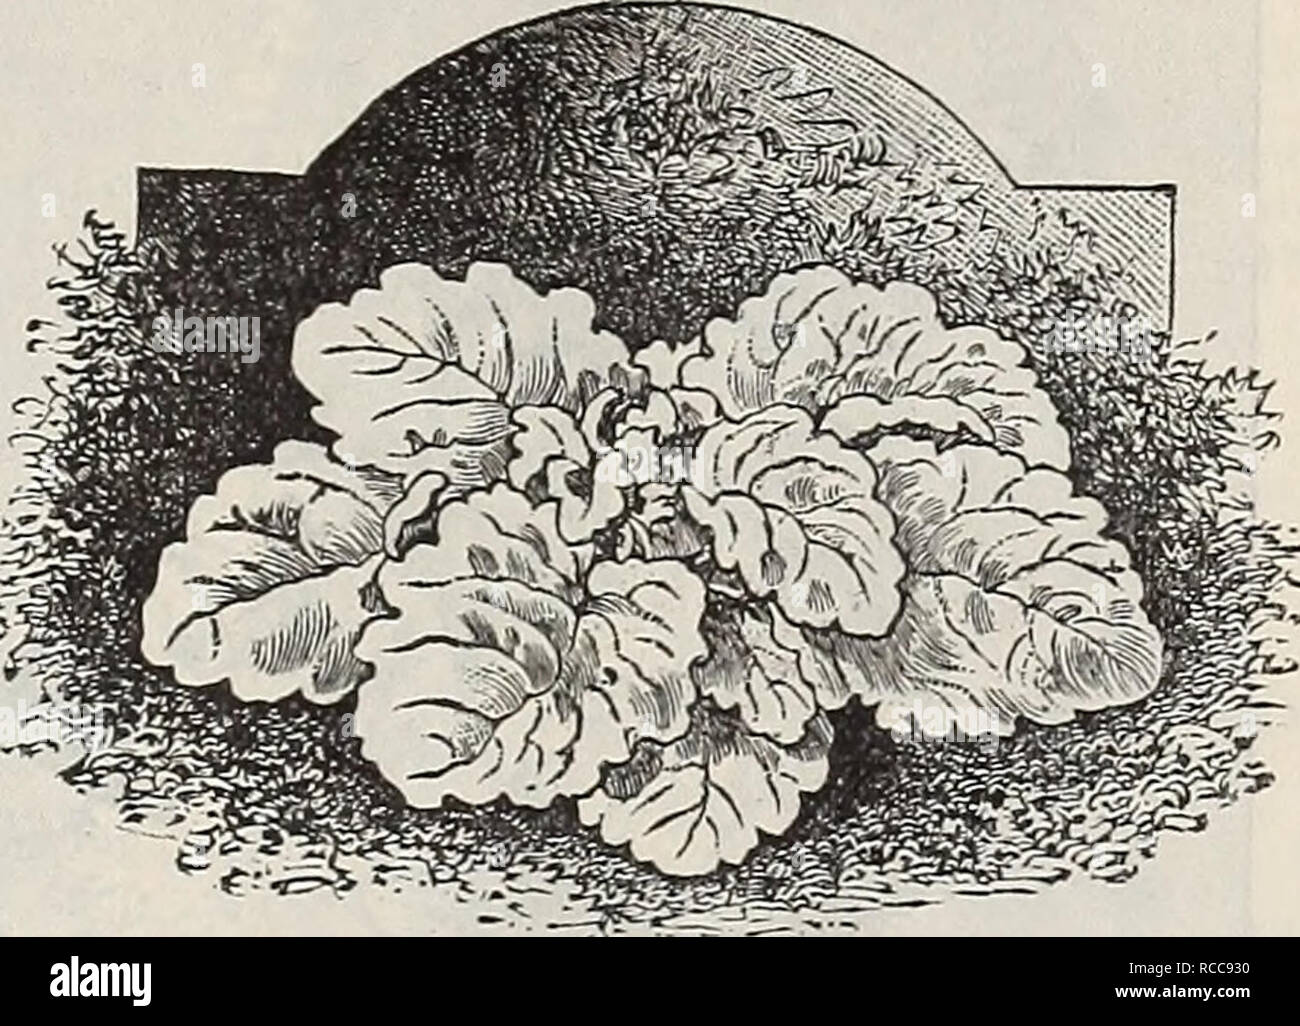 . Dreer's 1901 garden calendar. Seeds Catalogs; Nursery stock Catalogs; Gardening Equipment and supplies Catalogs; Flowers Seeds Catalogs; Vegetables Seeds Catalogs; Fruit Seeds Catalogs. Salvia Argentea Saxifraga Pyramidalis. SEDUM (Stone-crop). The dwarf or creeping varieties are siitable for rock-work, covering graves, dry, sunny banks and carpet bedding, while the taller species make fine subjects for the mixed border. Acre {Goldin Moss). Creeping, foliage and flowers bright yellow. 10 cts. each ; .$ 1.00 per doz.; $6 00 per 100. Album. Creeping, bright green foliage ; flowers white. Maxi Stock Photo